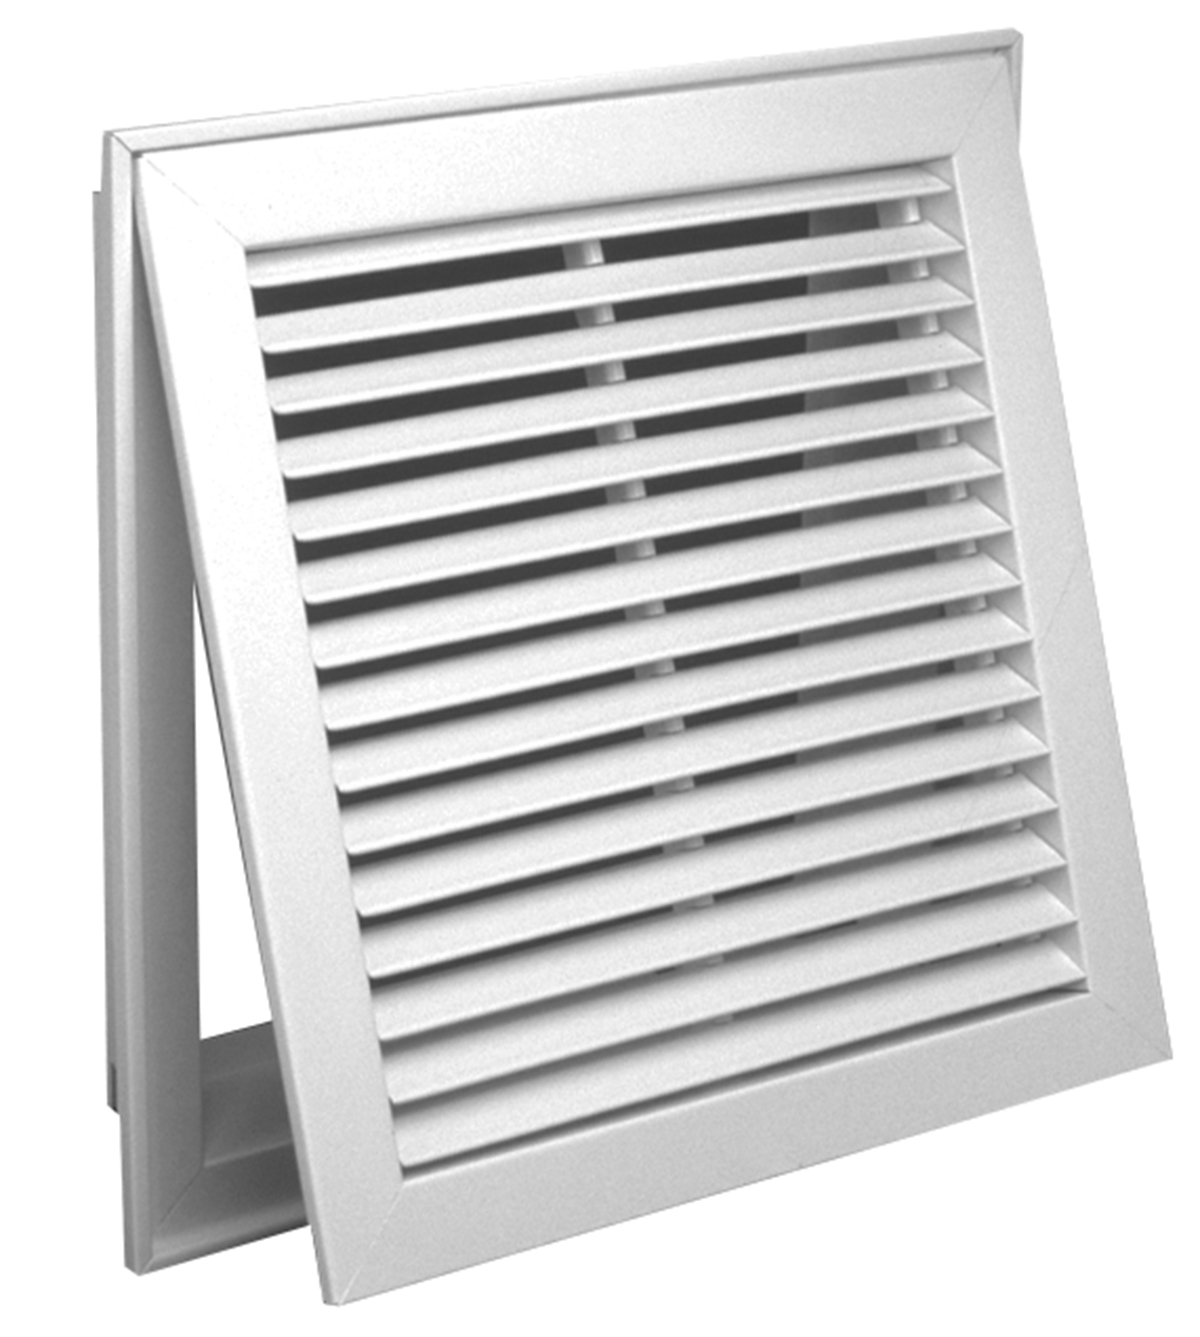 96AFB Steel Return Air Filter Grille, 35degree Fixed Blade Hart & Cooley